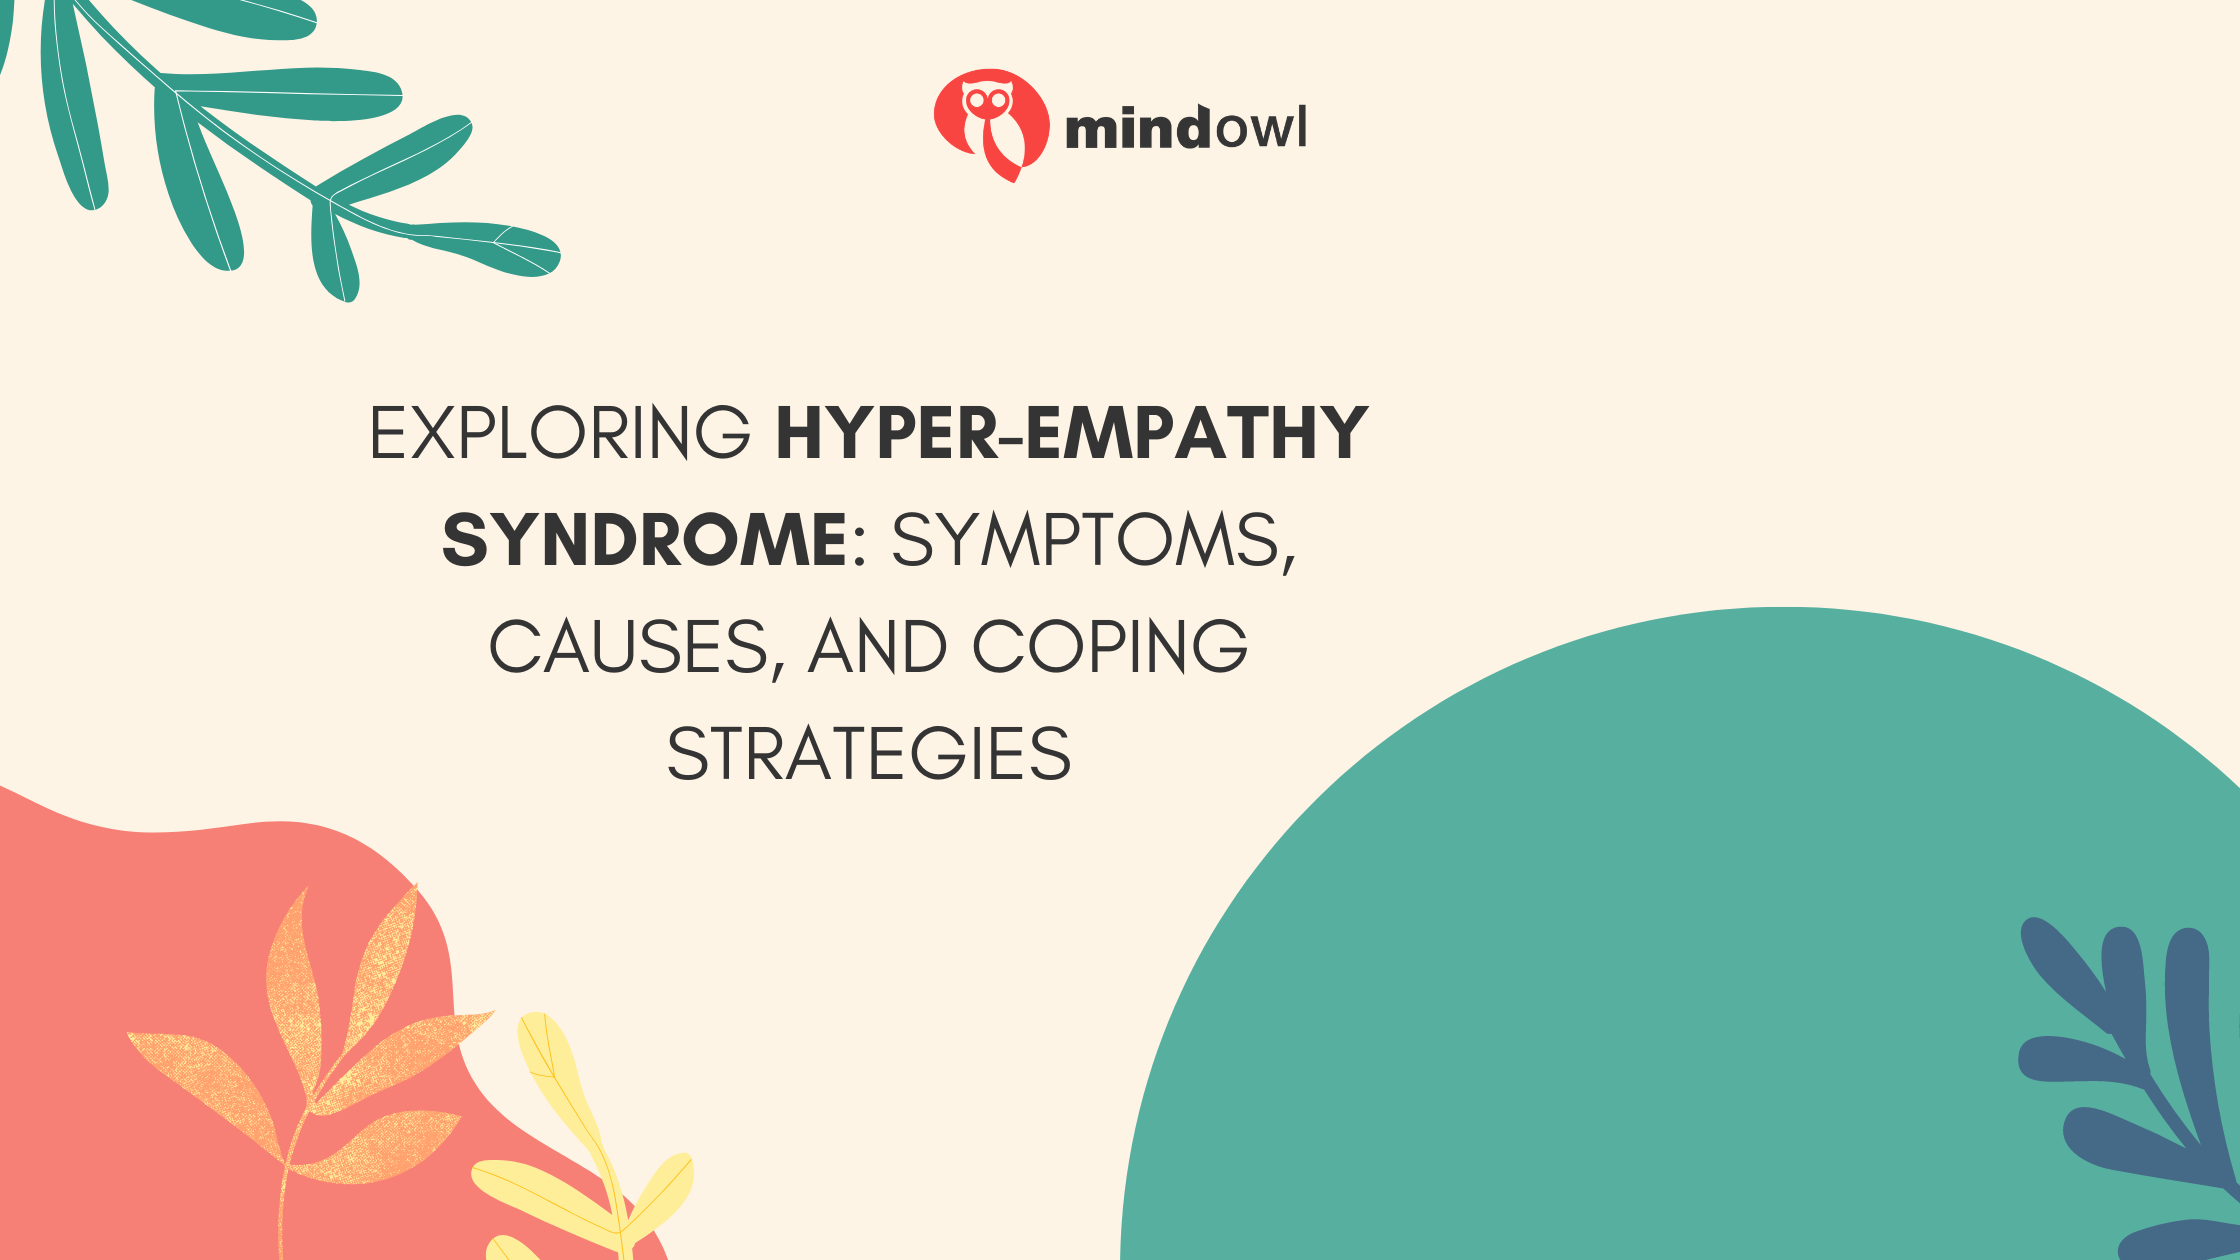 Exploring Hyper-Empathy Syndrome: Symptoms, Causes, and Coping Strategies